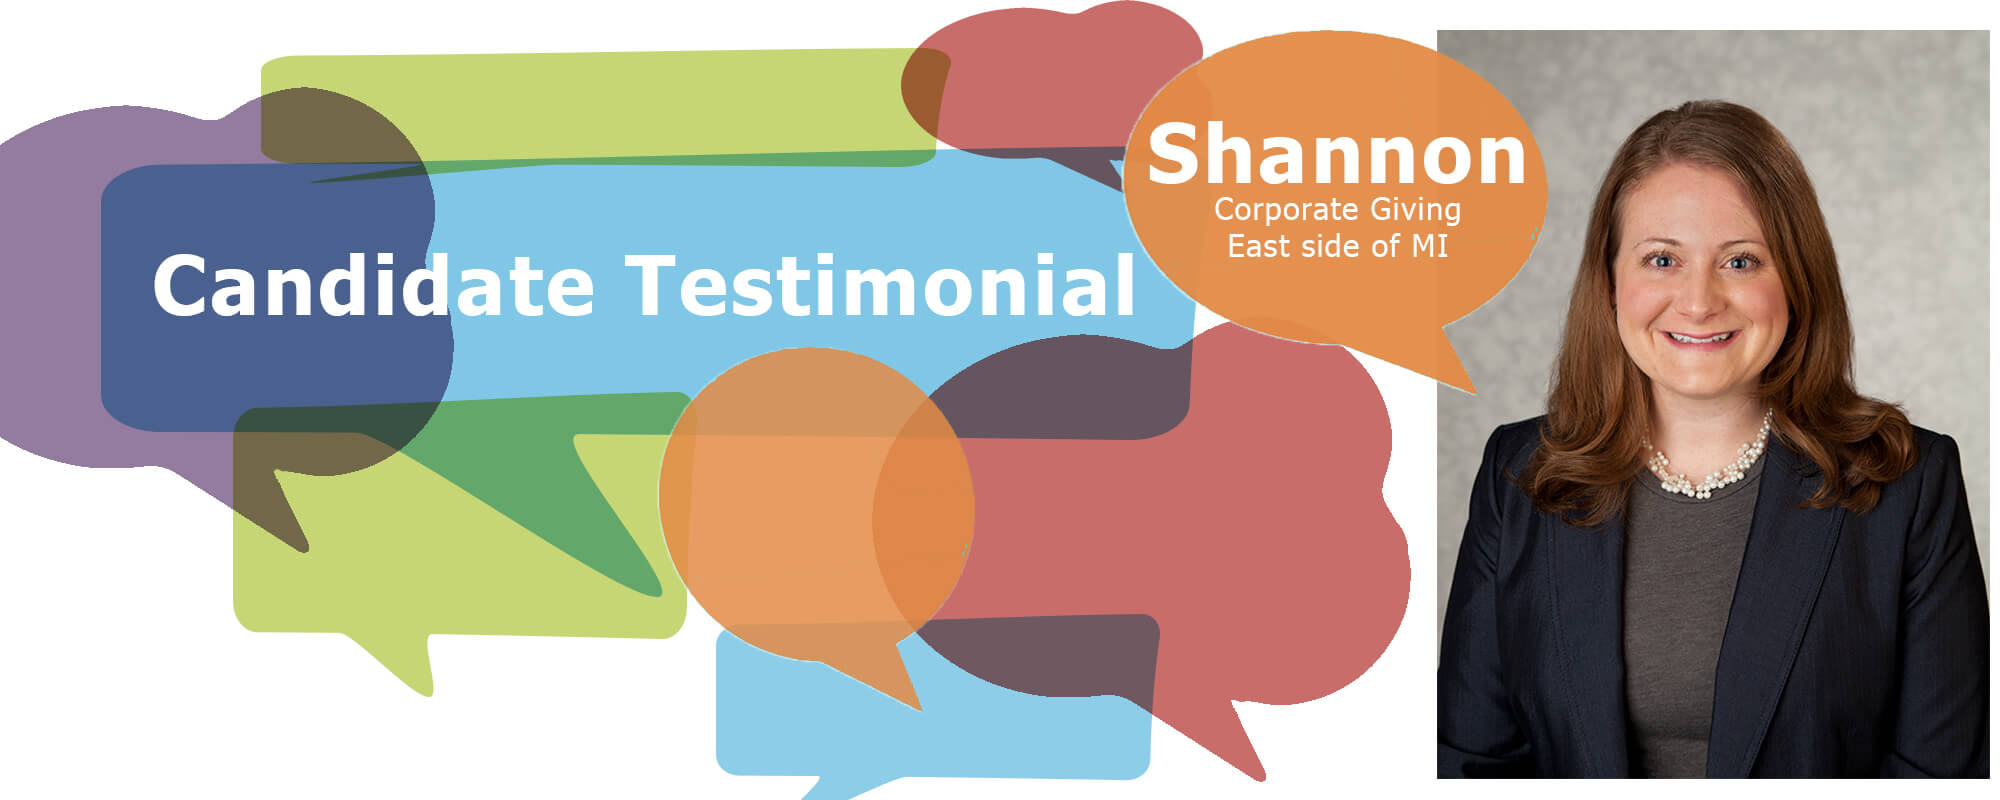 Candidate Testimonial: Shannon